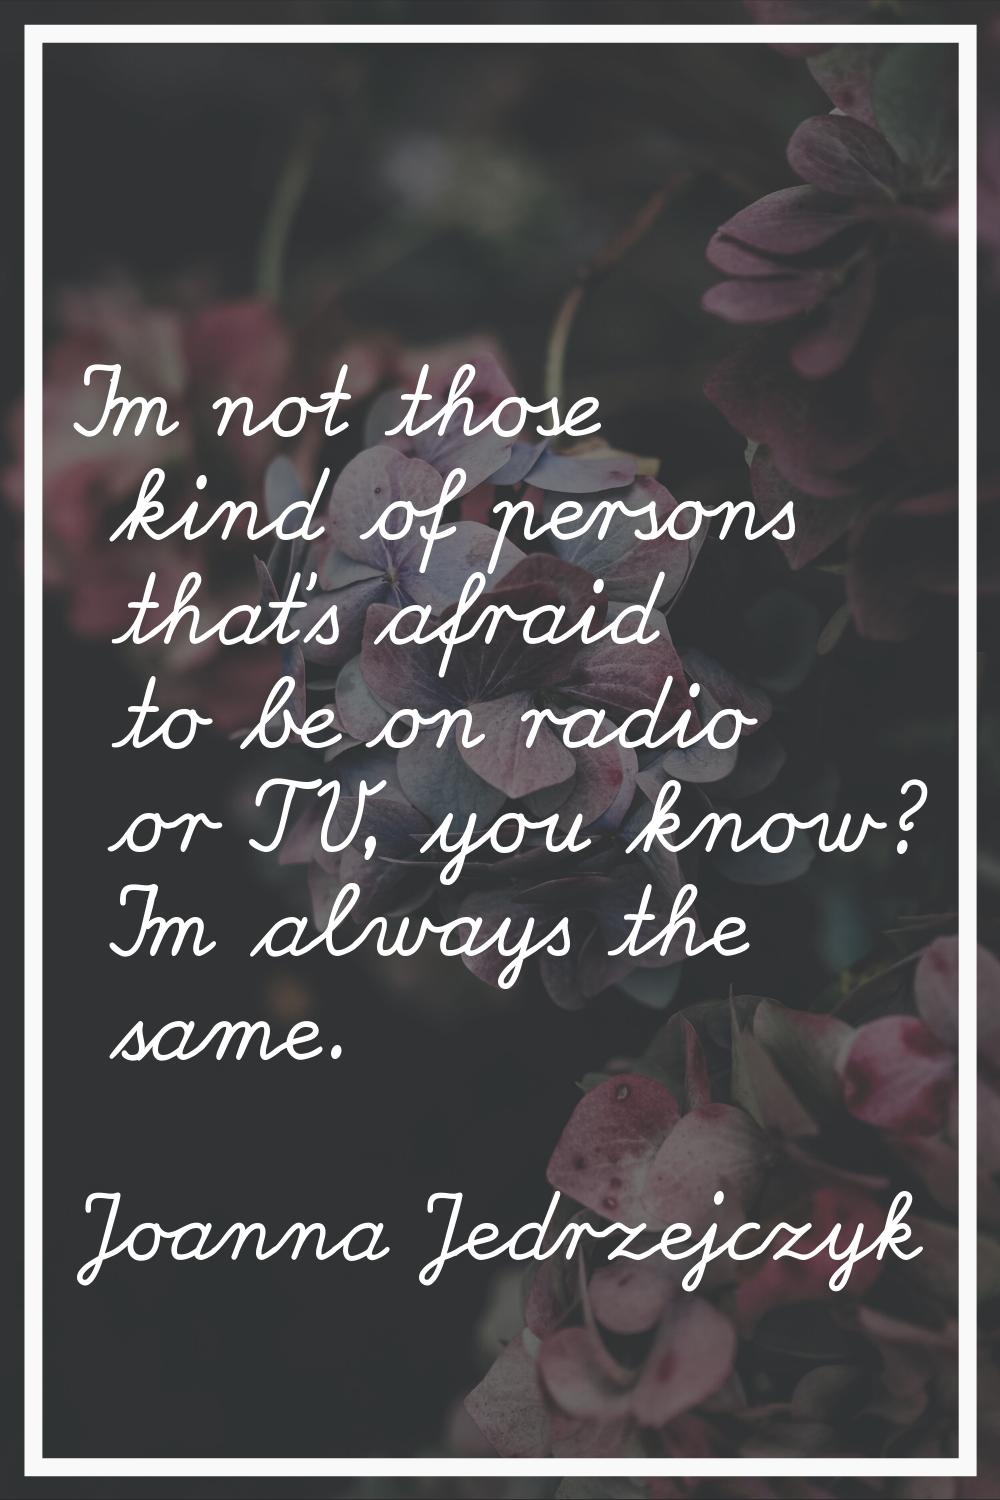 I'm not those kind of persons that's afraid to be on radio or TV, you know? I'm always the same.